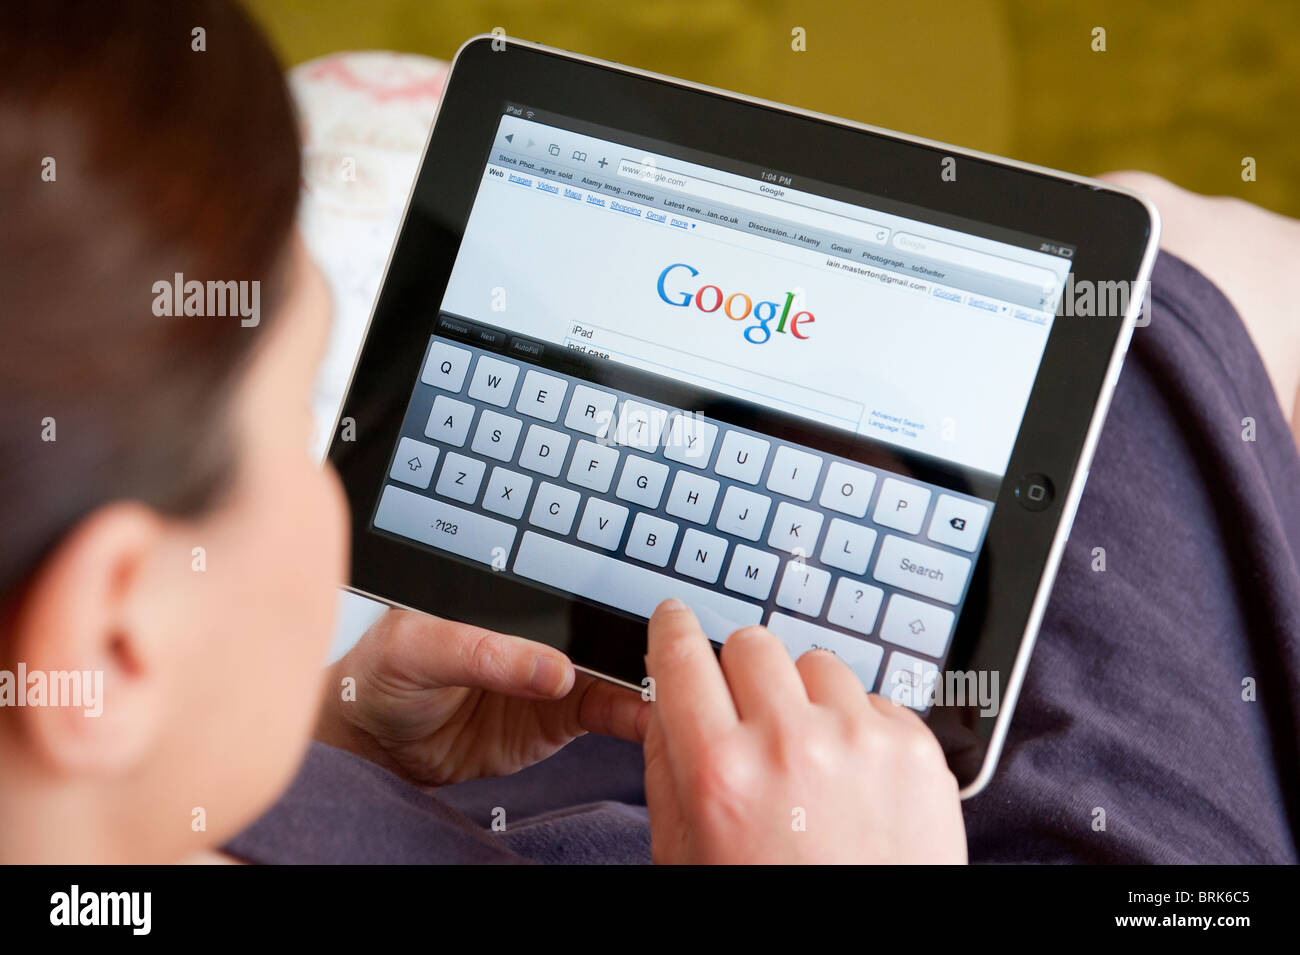 Woman searching internet using Google search engine on an iPad tablet computer Stock Photo